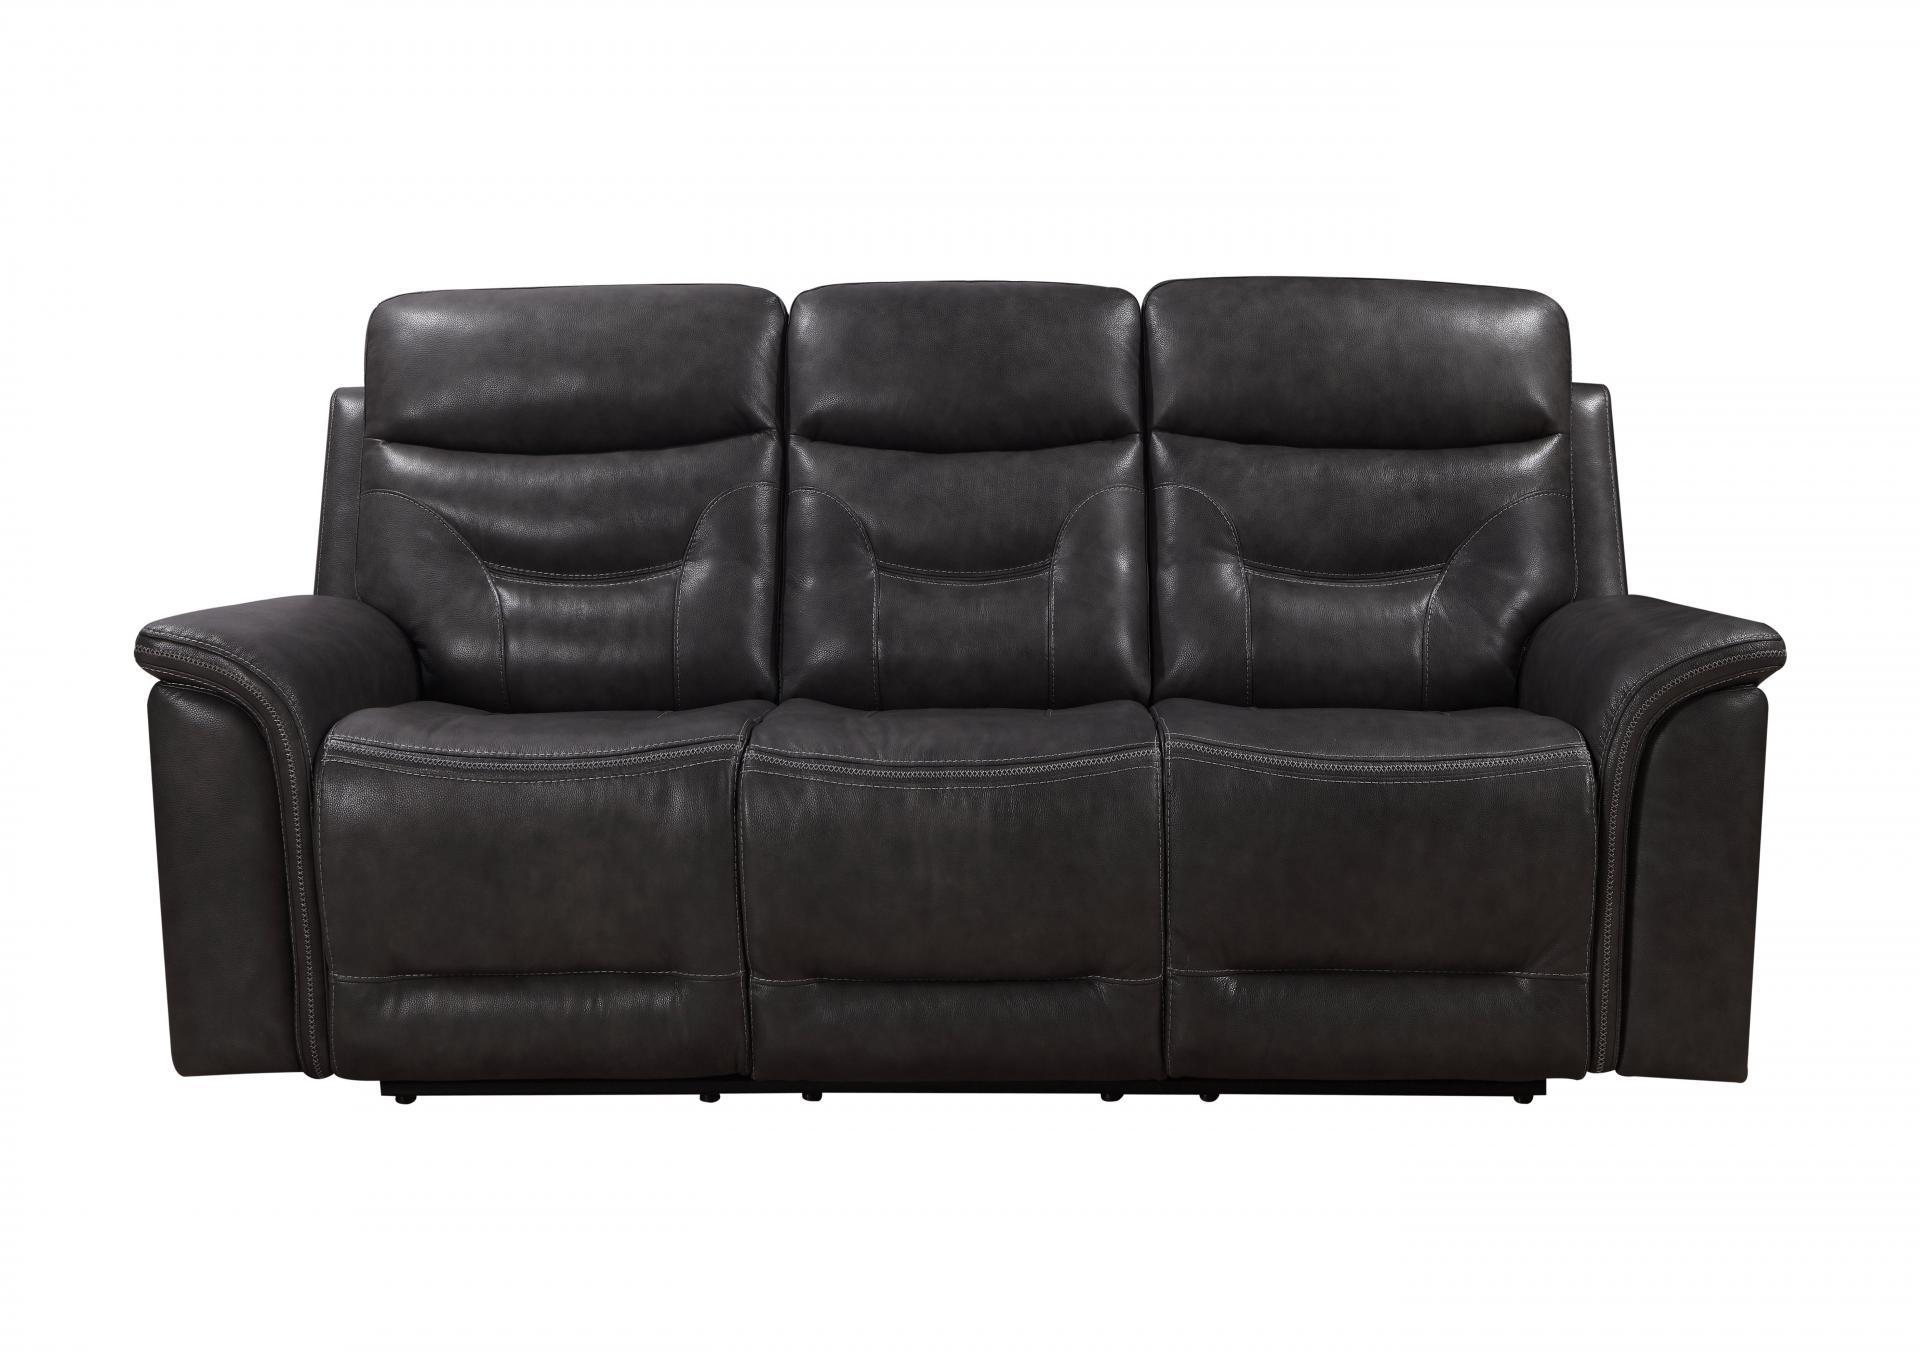 Leather Gray Power Head and Power Foot Dual Reclining Sofa